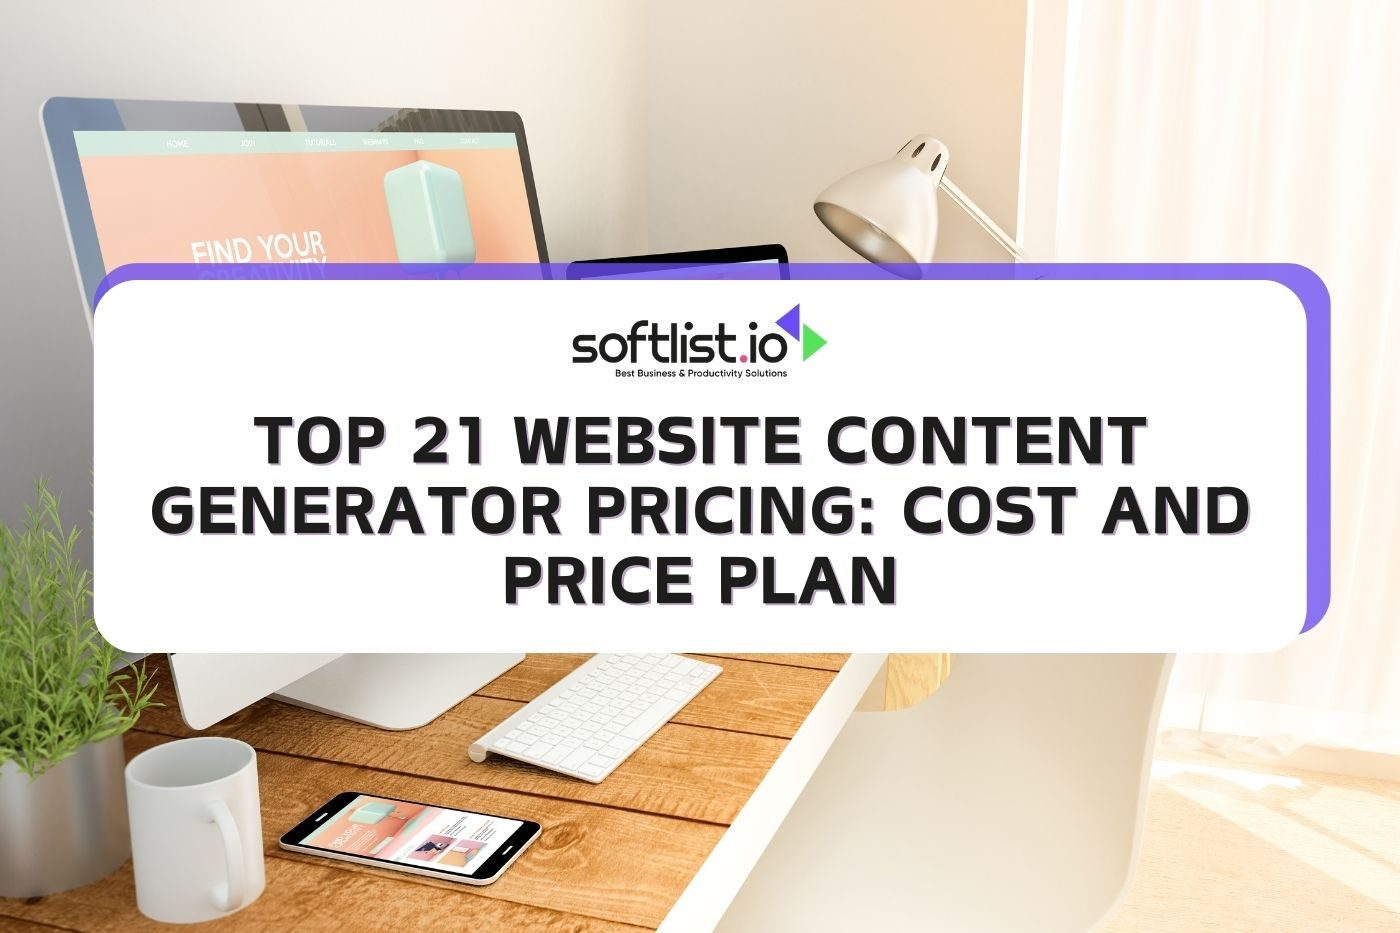 Top 21 Website Content Generator Pricing: Cost And Price Plan